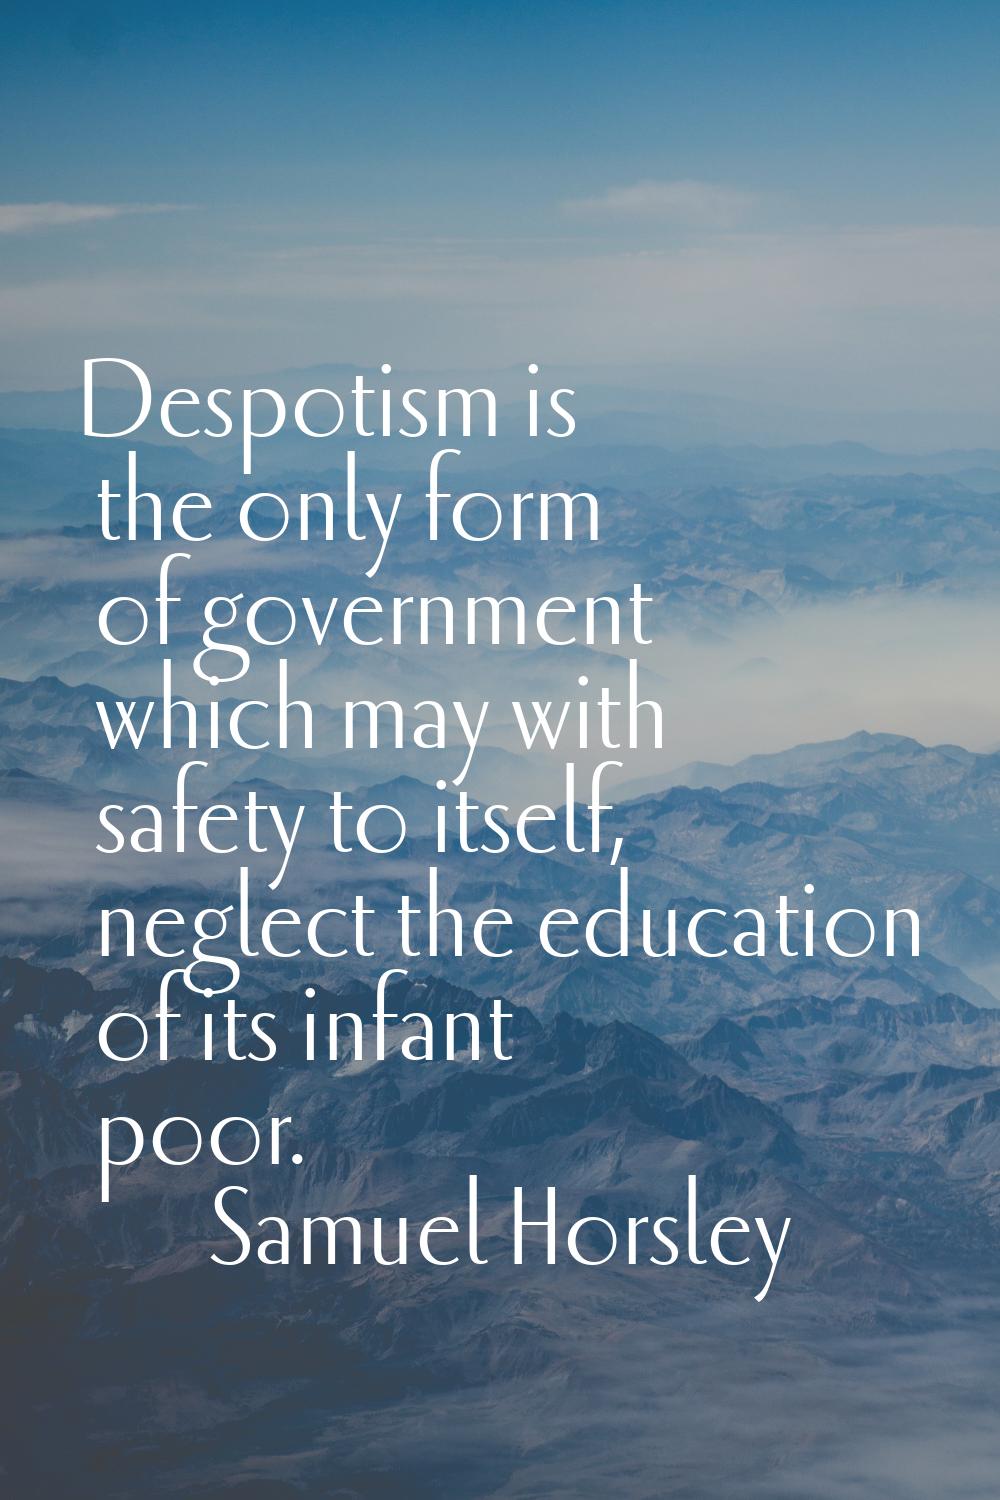 Despotism is the only form of government which may with safety to itself, neglect the education of 